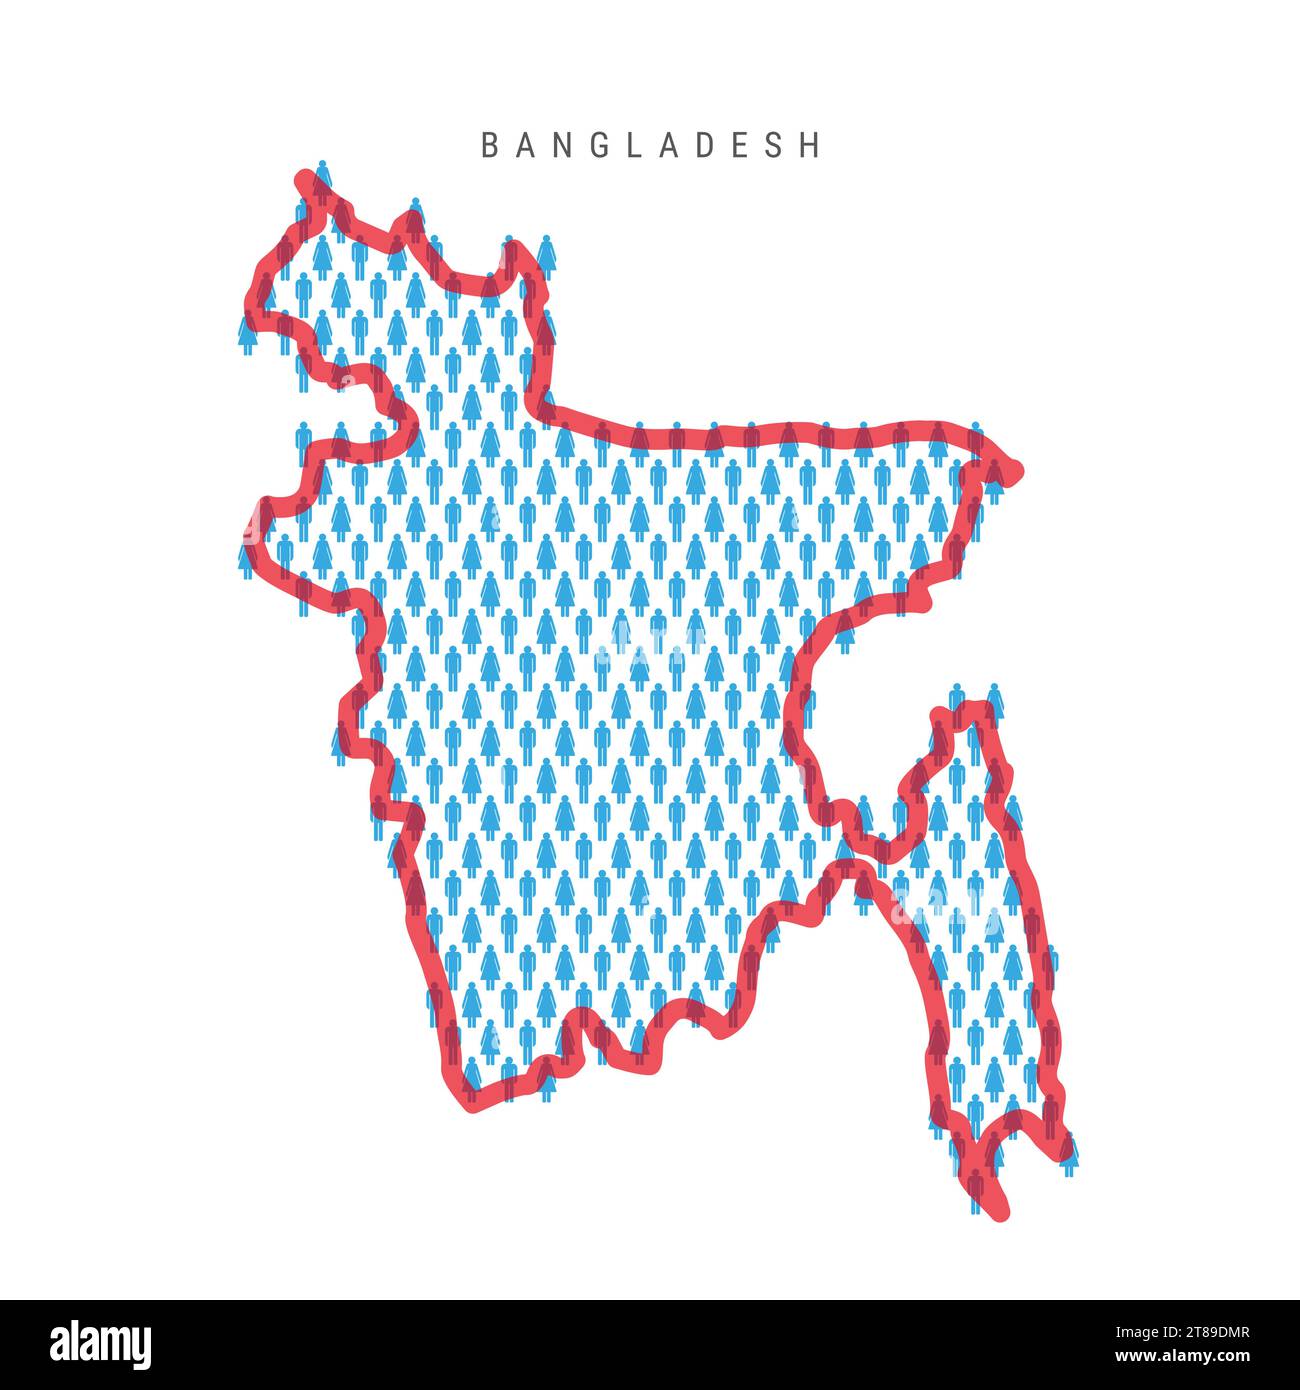 Bangladesh population map. Stick figures Bangladeshi people map with bold red translucent country border. Pattern of men and women icons. Isolated vec Stock Vector